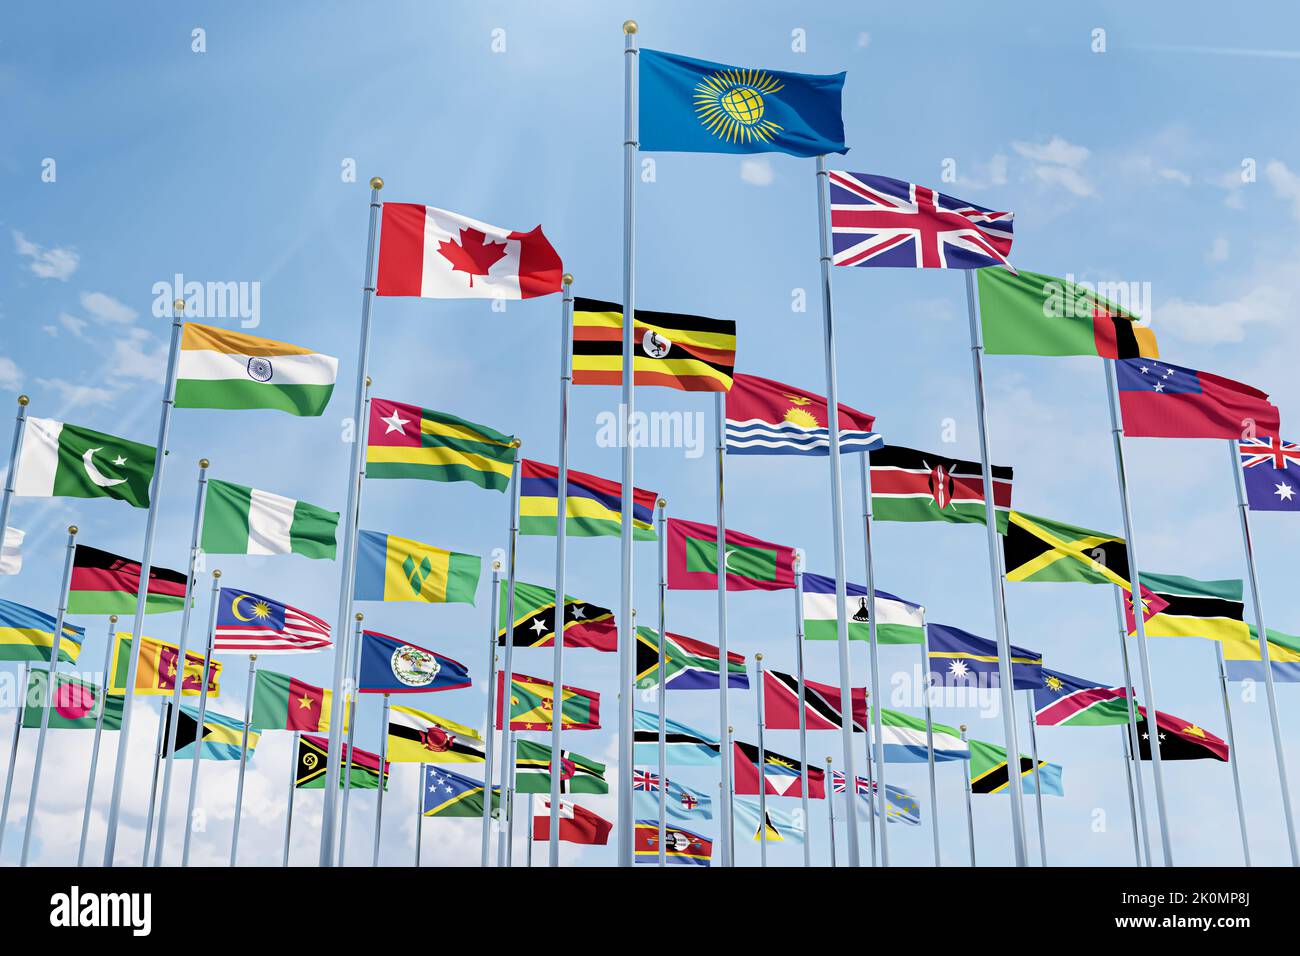 The flag of the Commonwealth of Nations with the flags of the organization's countries along with the flag of Britain Stock Photo